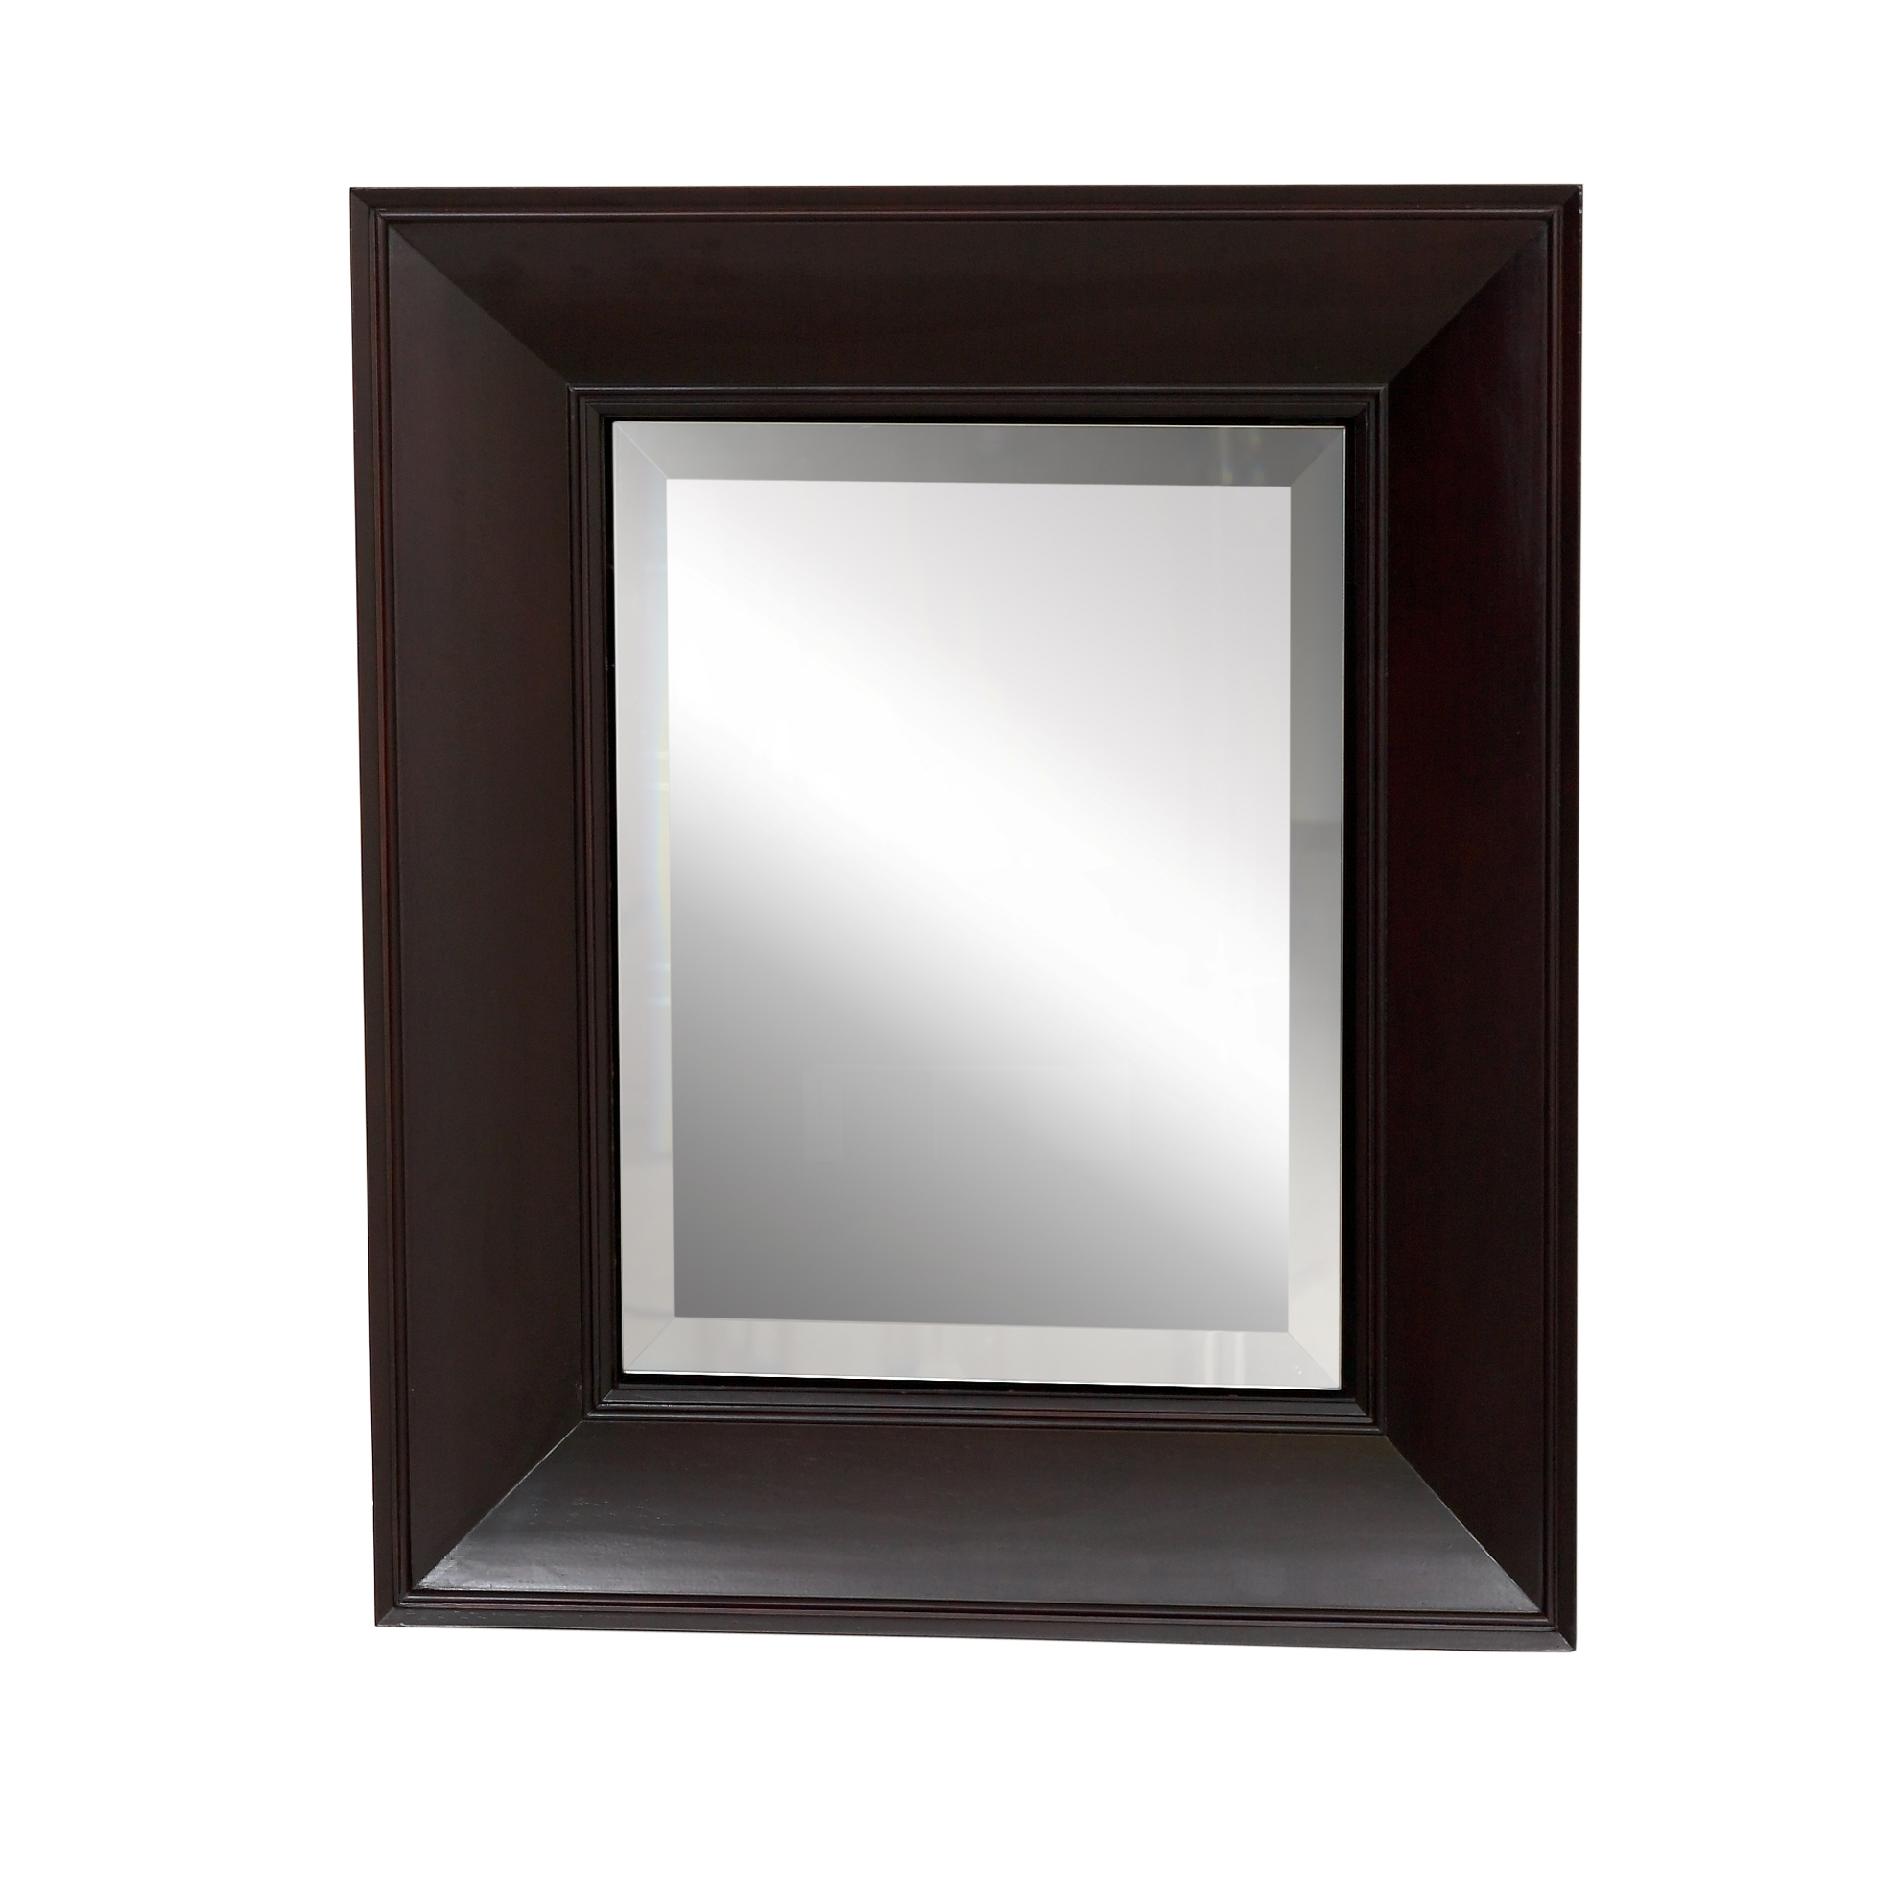 UPC 043197128881 product image for Zenith Products Concave Frame Bevel Mirrored 21